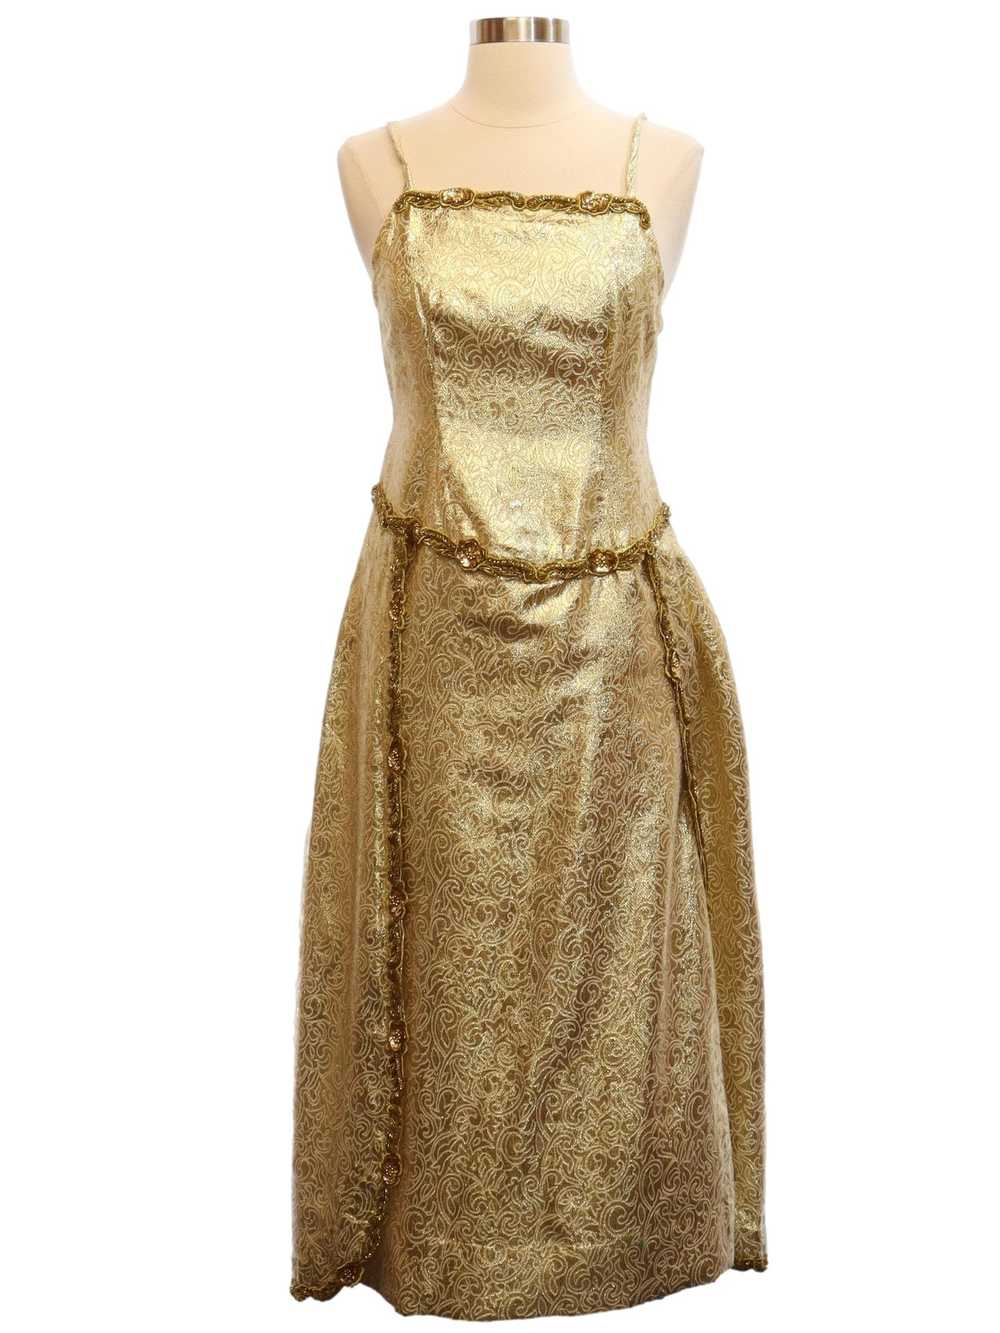 1980's Prom Or Cocktail Dress - image 1